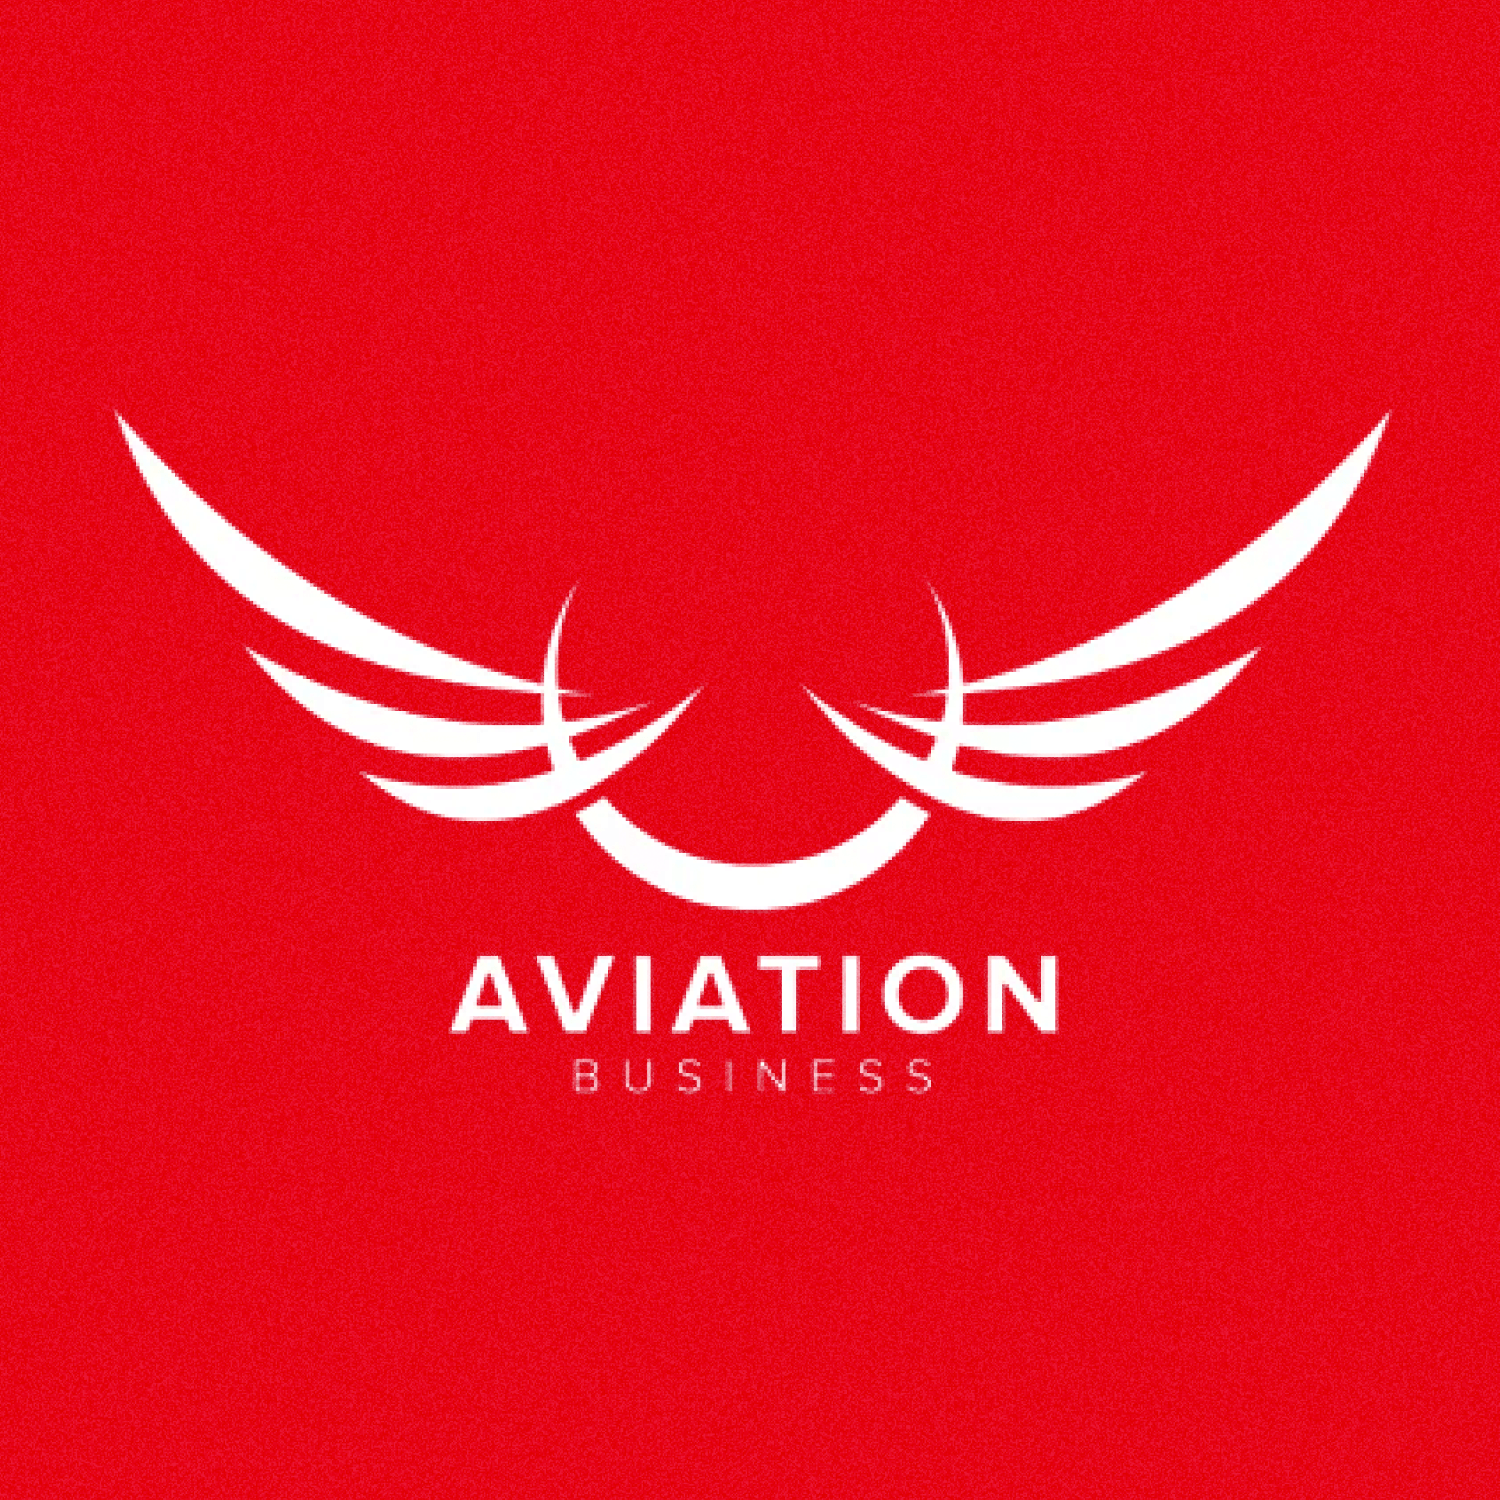 Logo on a red background.